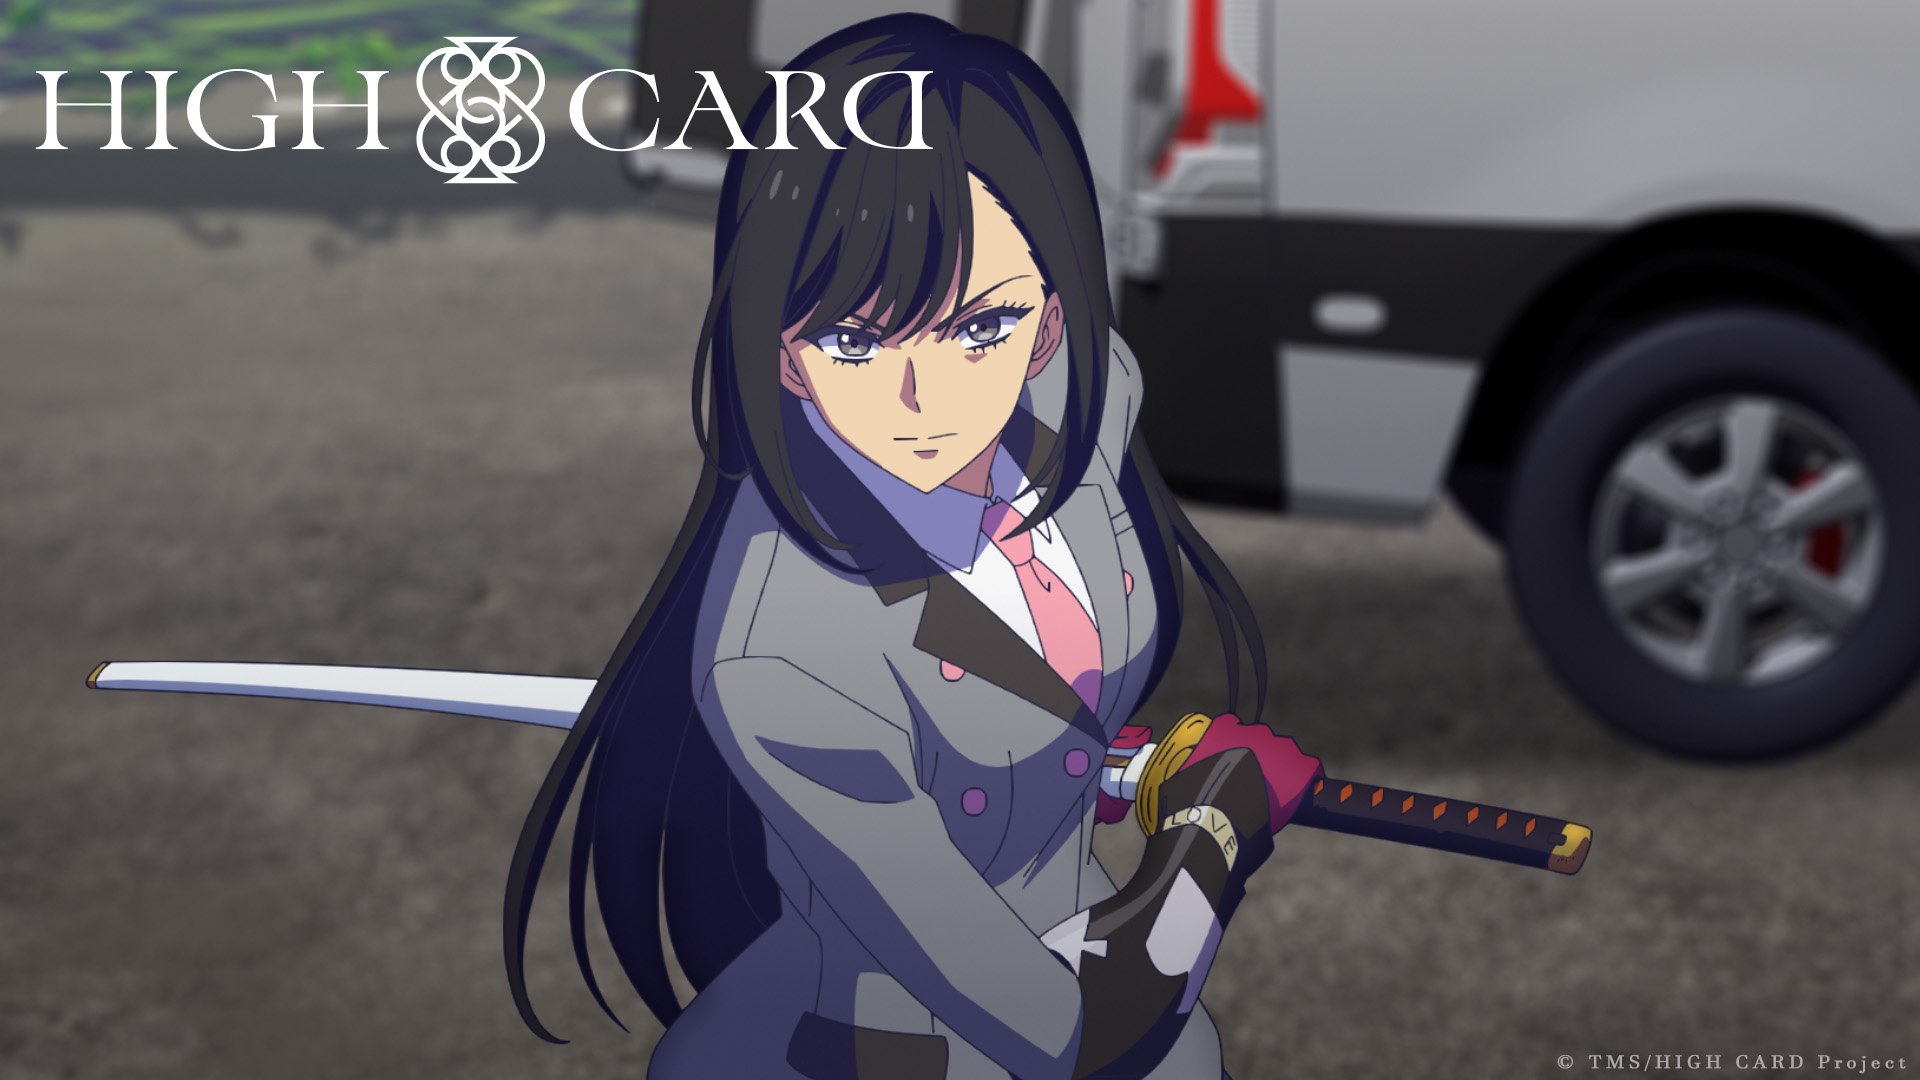 Trailer: TMS Deals Out Original Anime 'High Card' in January 2023